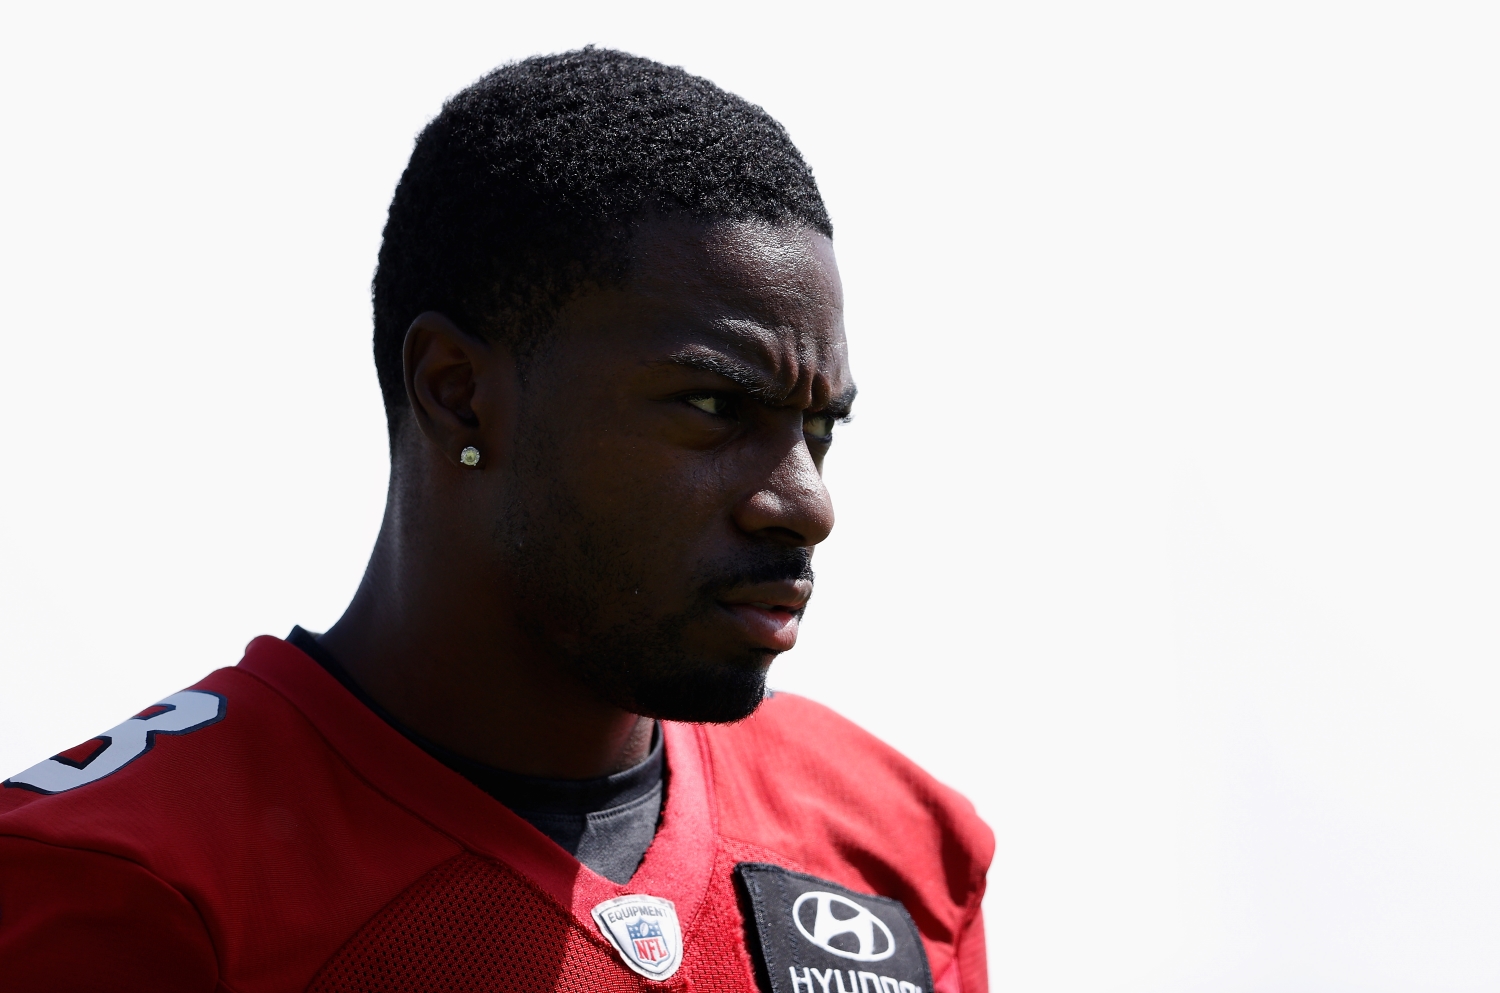 Arizona Cardinals wide receiver A.J. Green participates in an off-season workout.